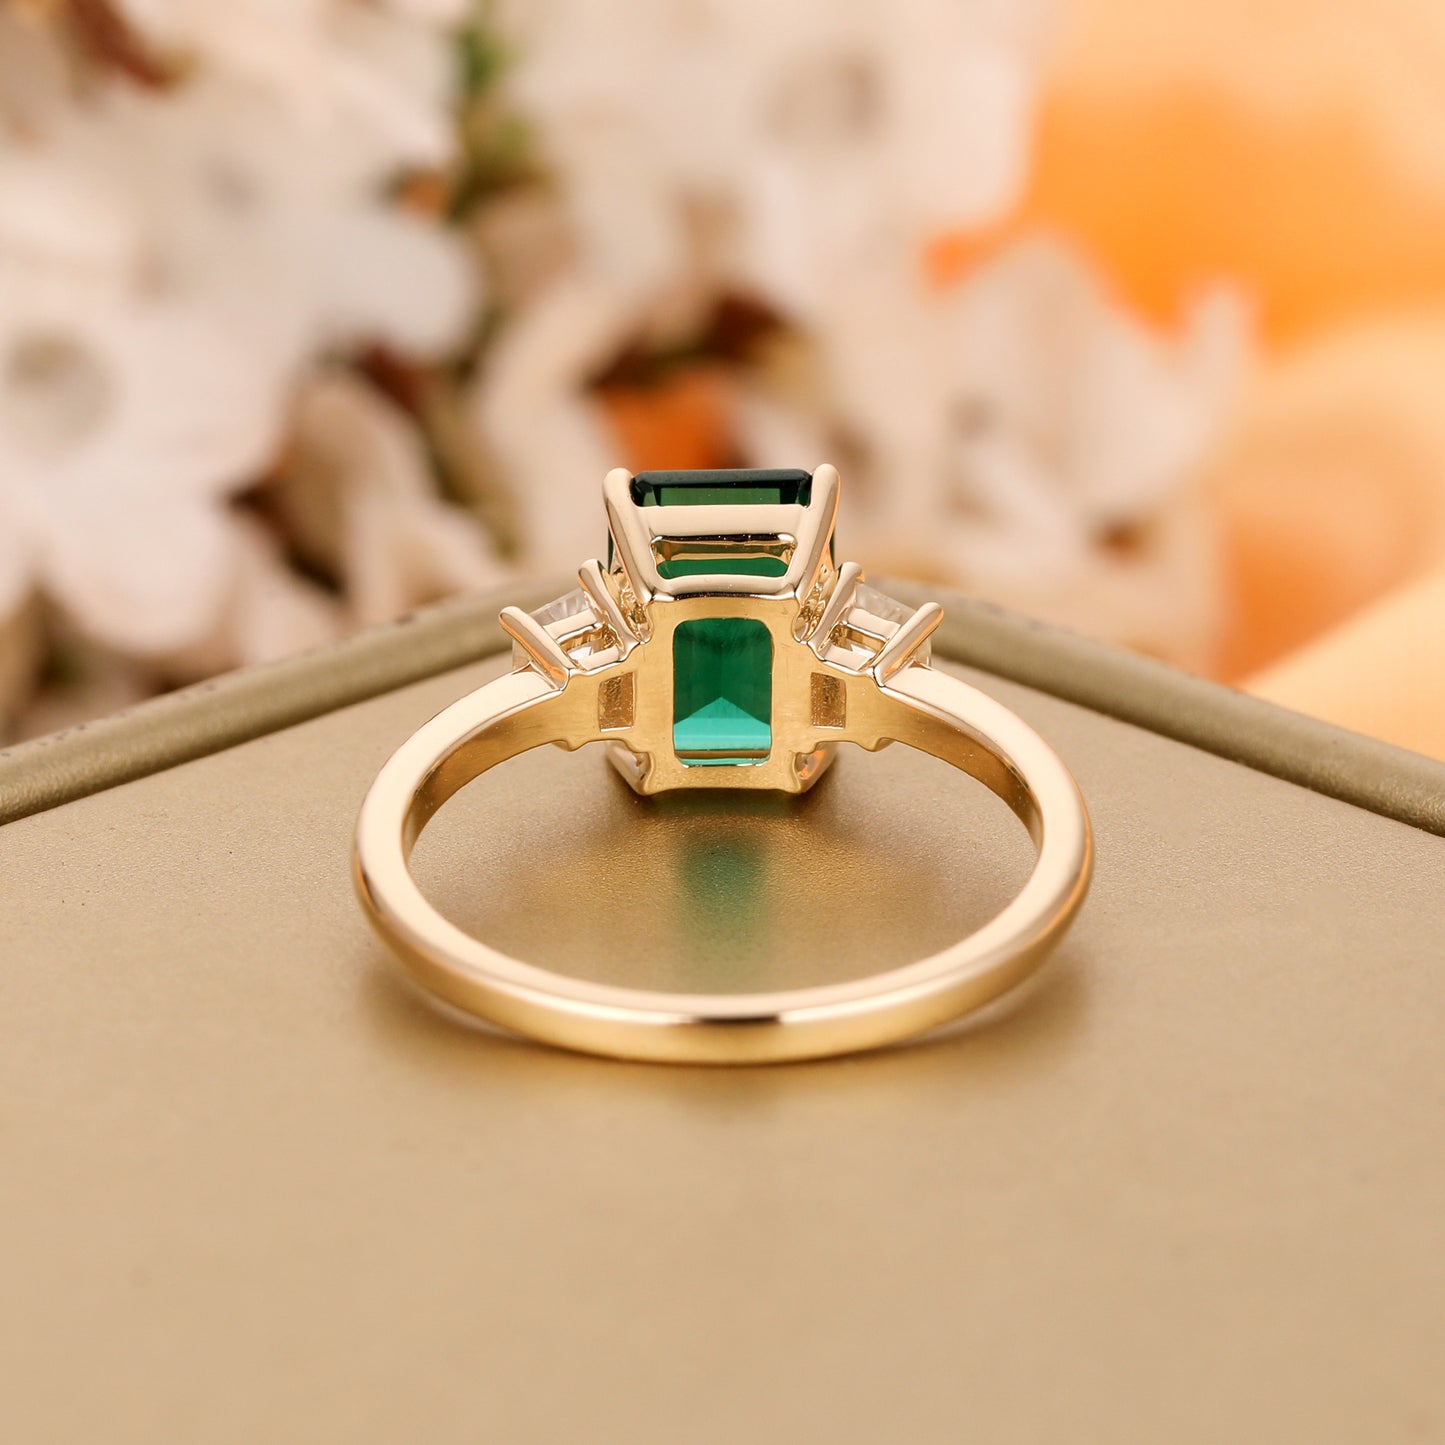 G008 Vintage 1.5 Carat Emerald Cut Three Stone Emerald Anniversary Engagement Ring For Her